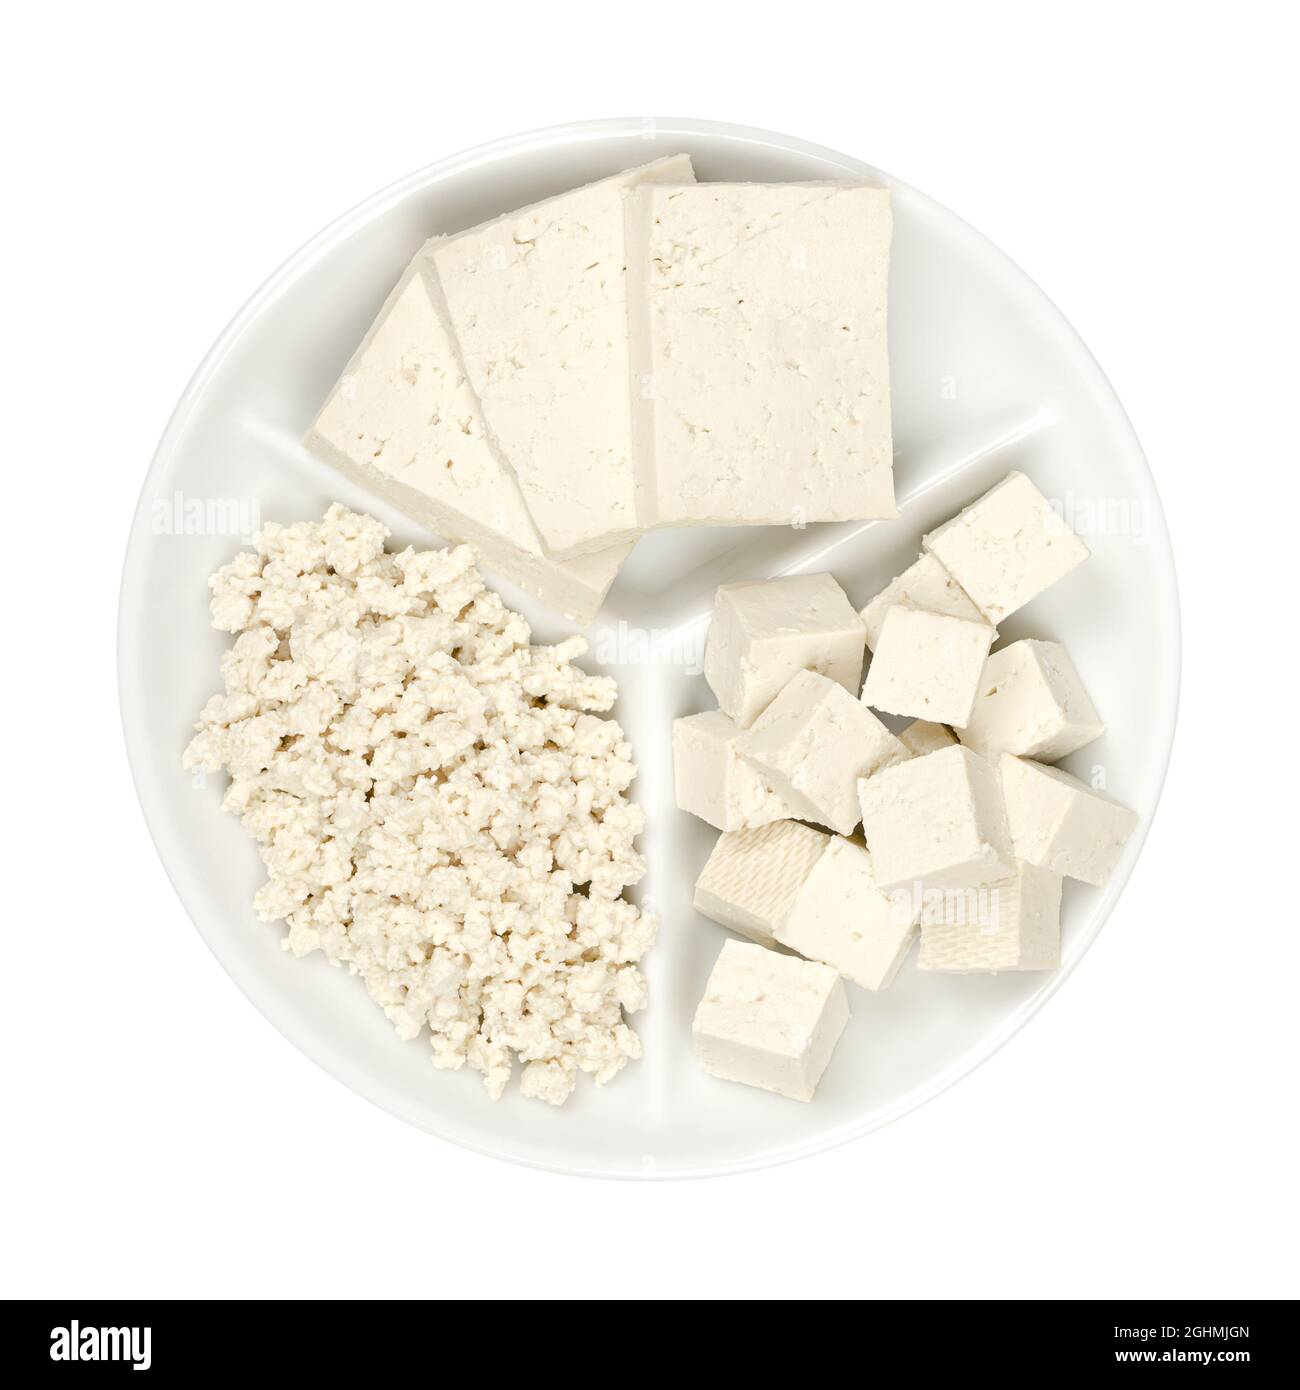 Processed white tofu, on a small white serving platter. Three slices, cubes and crumbled tofu. Bean curd made of coagulated soy milk. Stock Photo